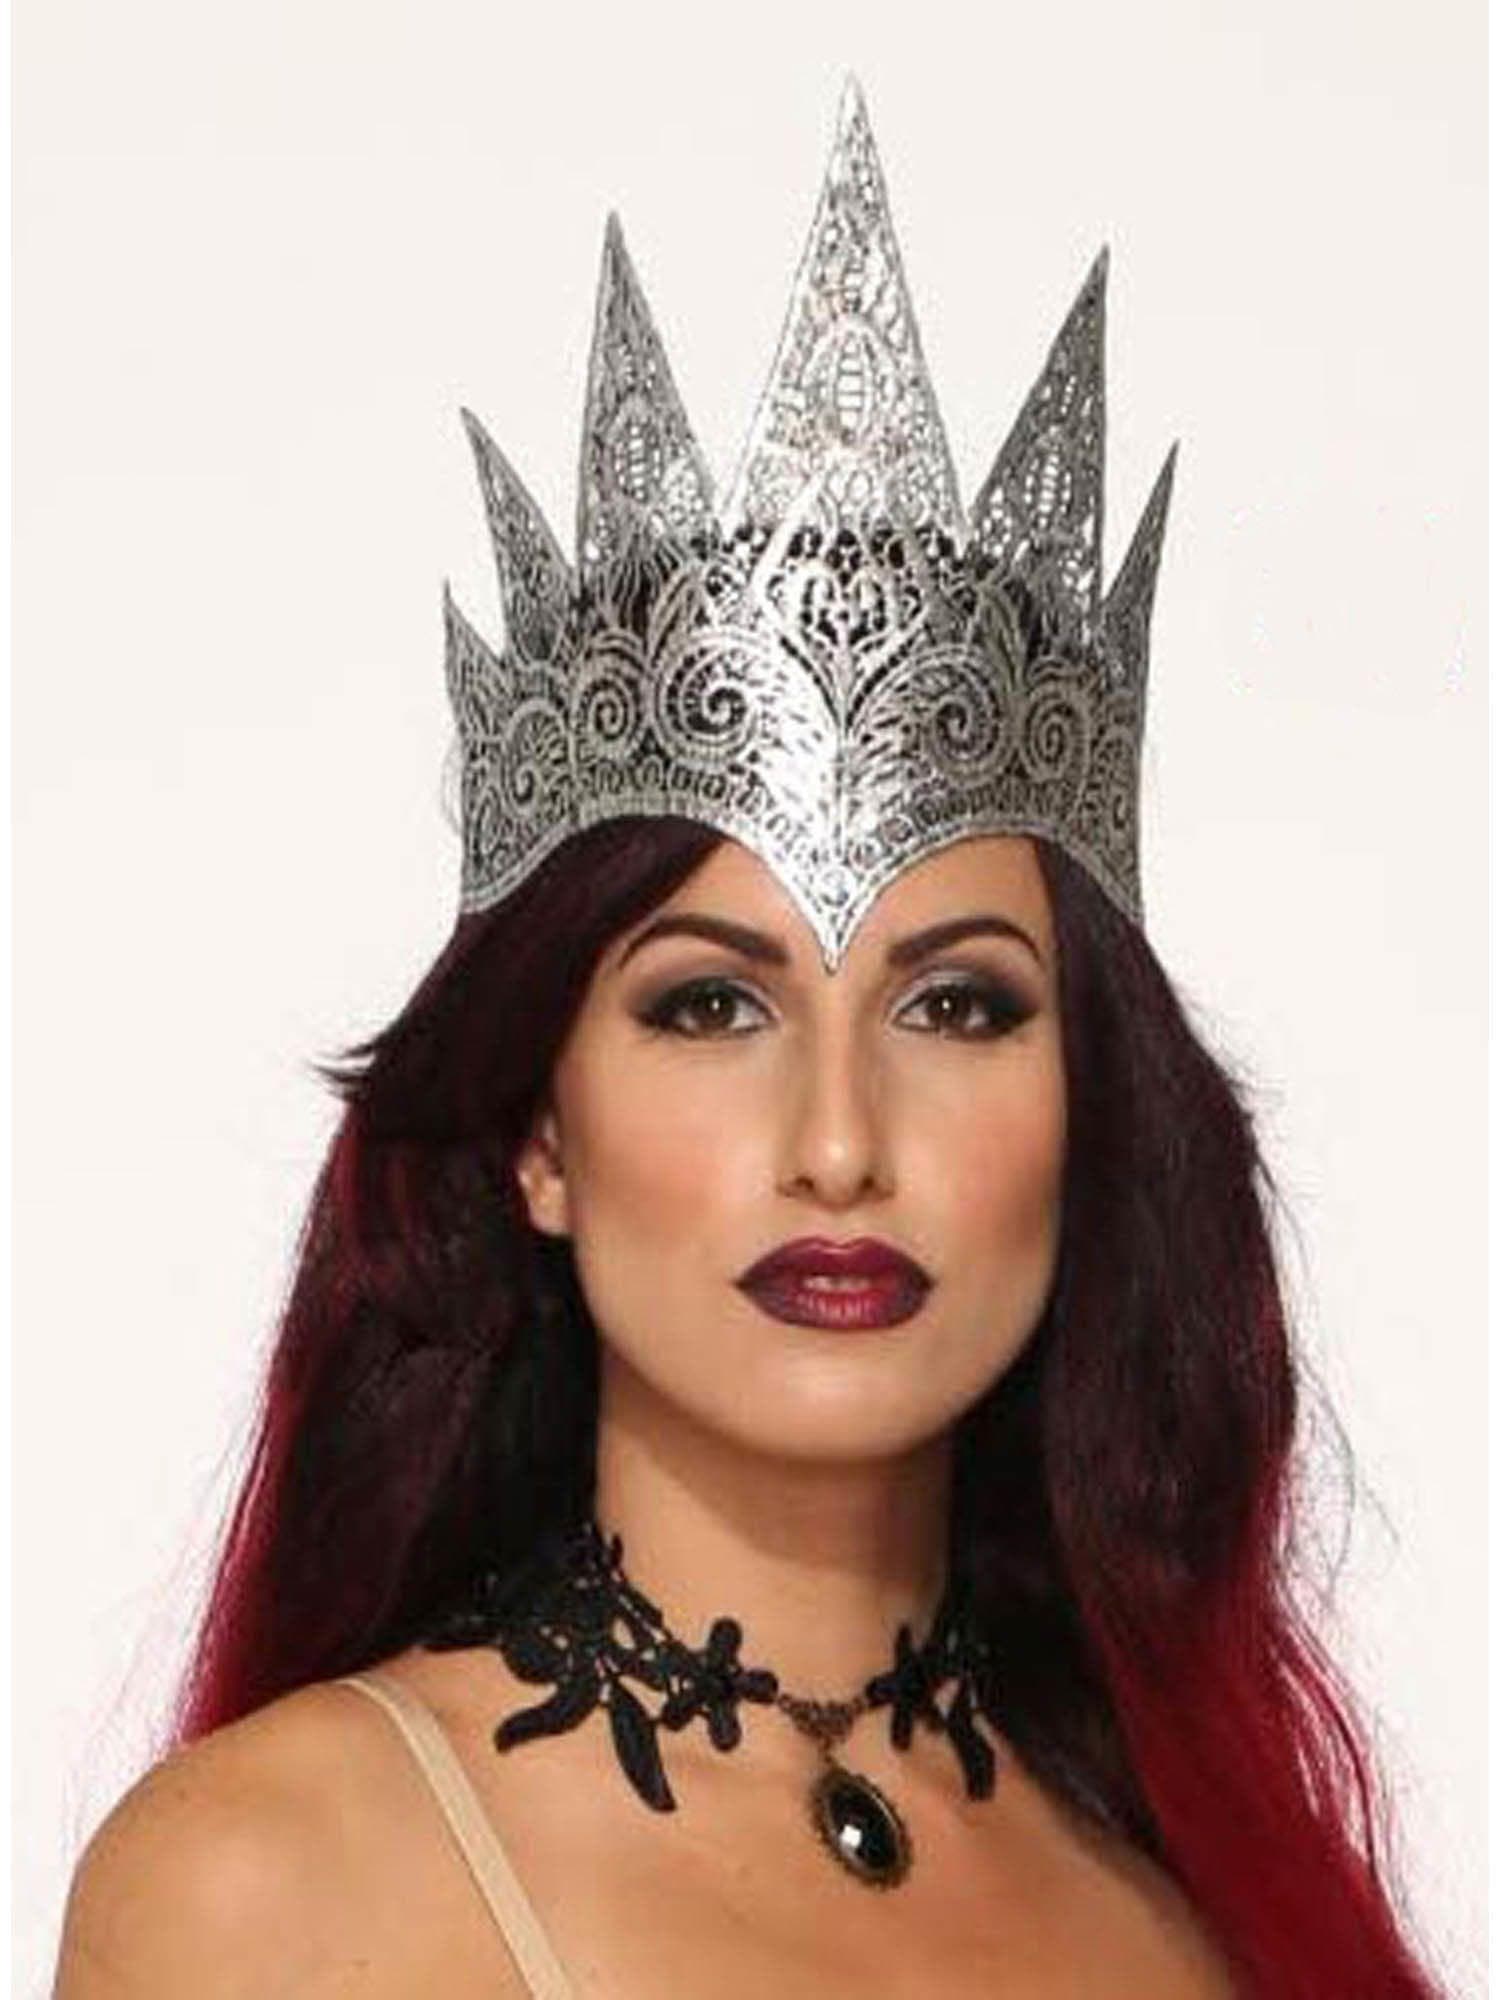 Queen Lace Crown - costumes.com